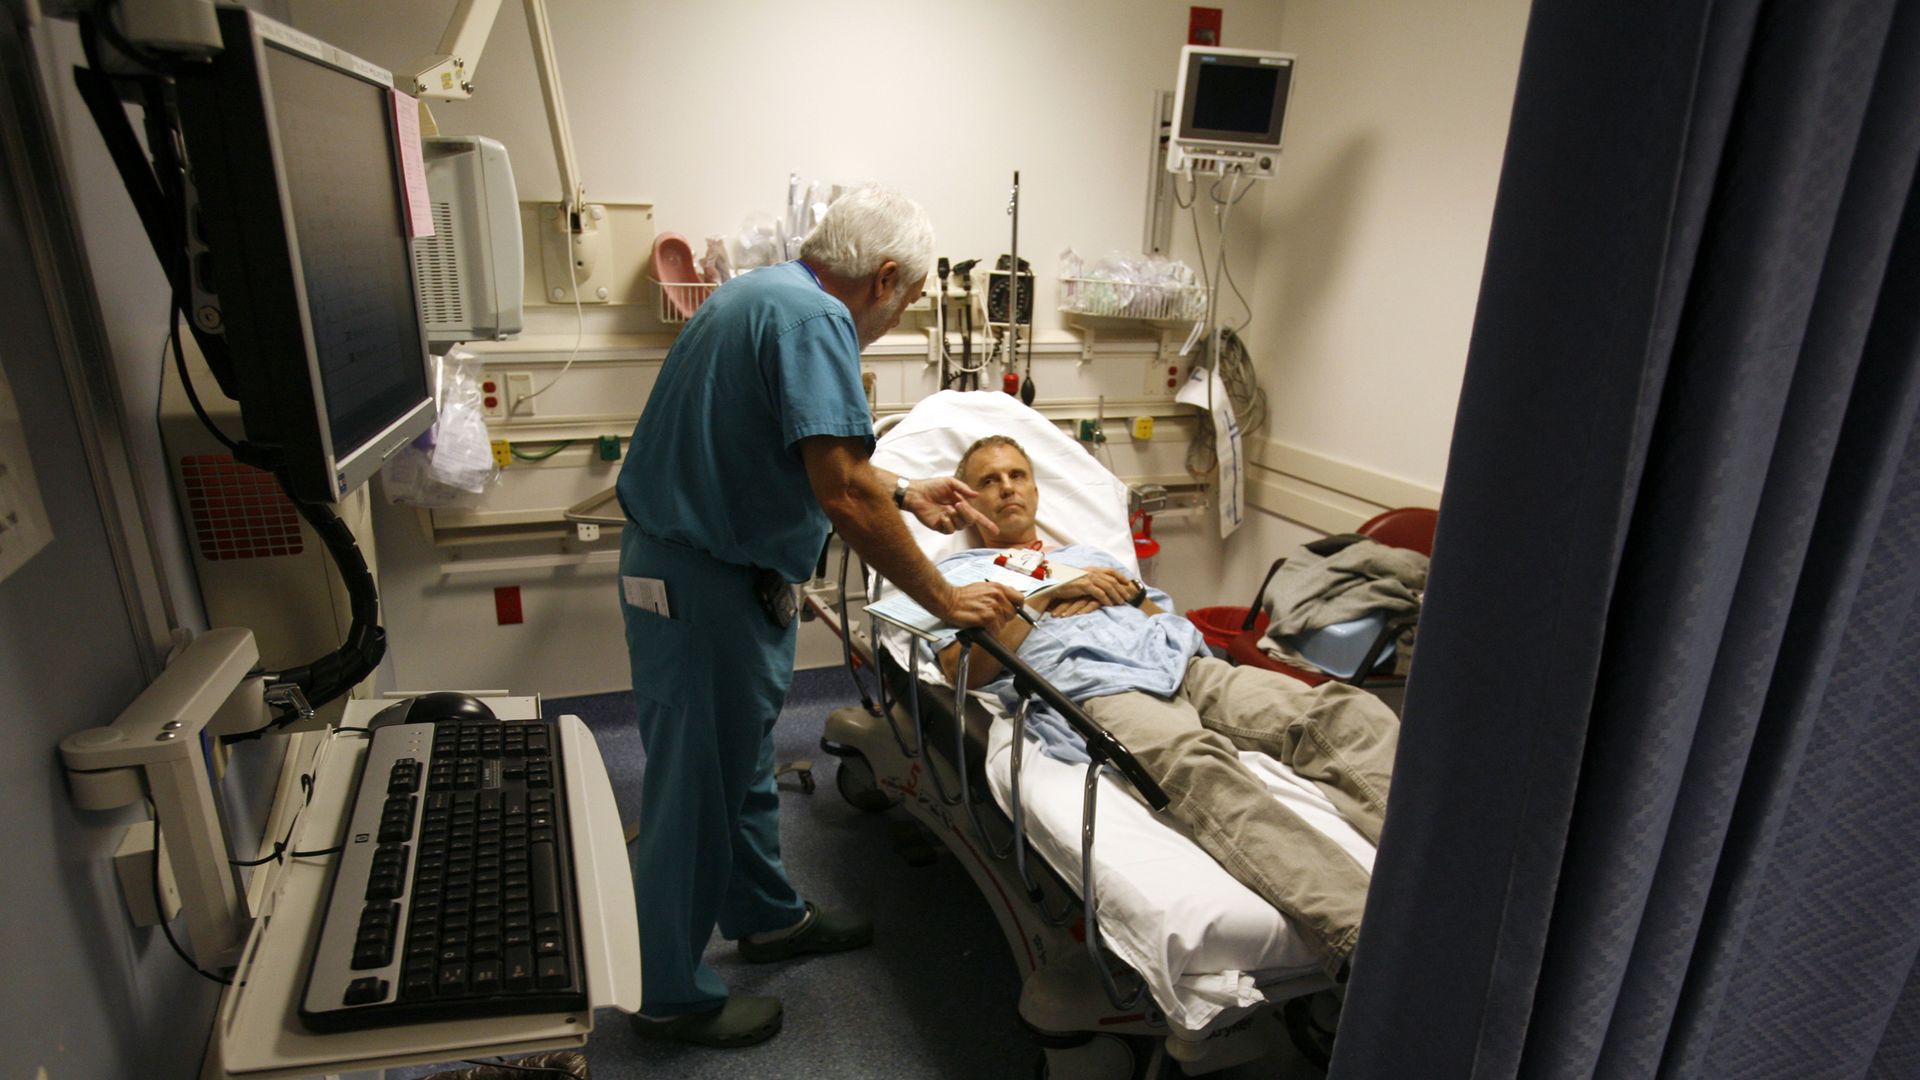 A doctor checks on a patient in an emergency room bed.